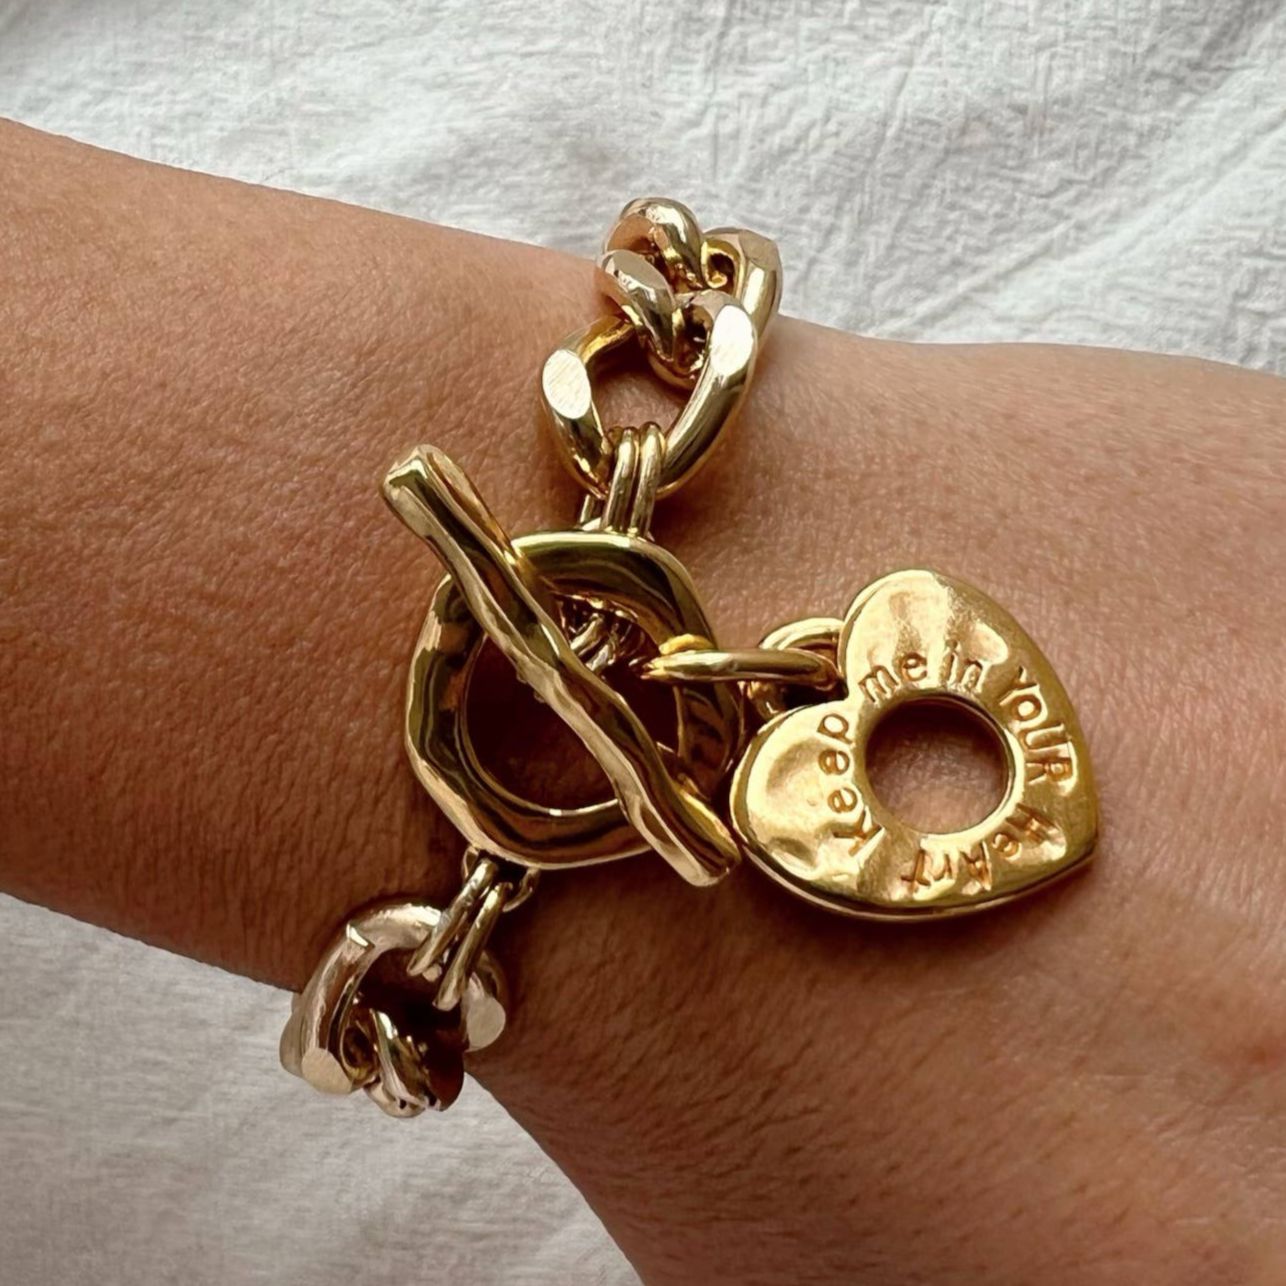 "Keep Me In Your Heart" Gold Chunky Chain Bracelet with Heart Charm | Handmade in Athens, Greece